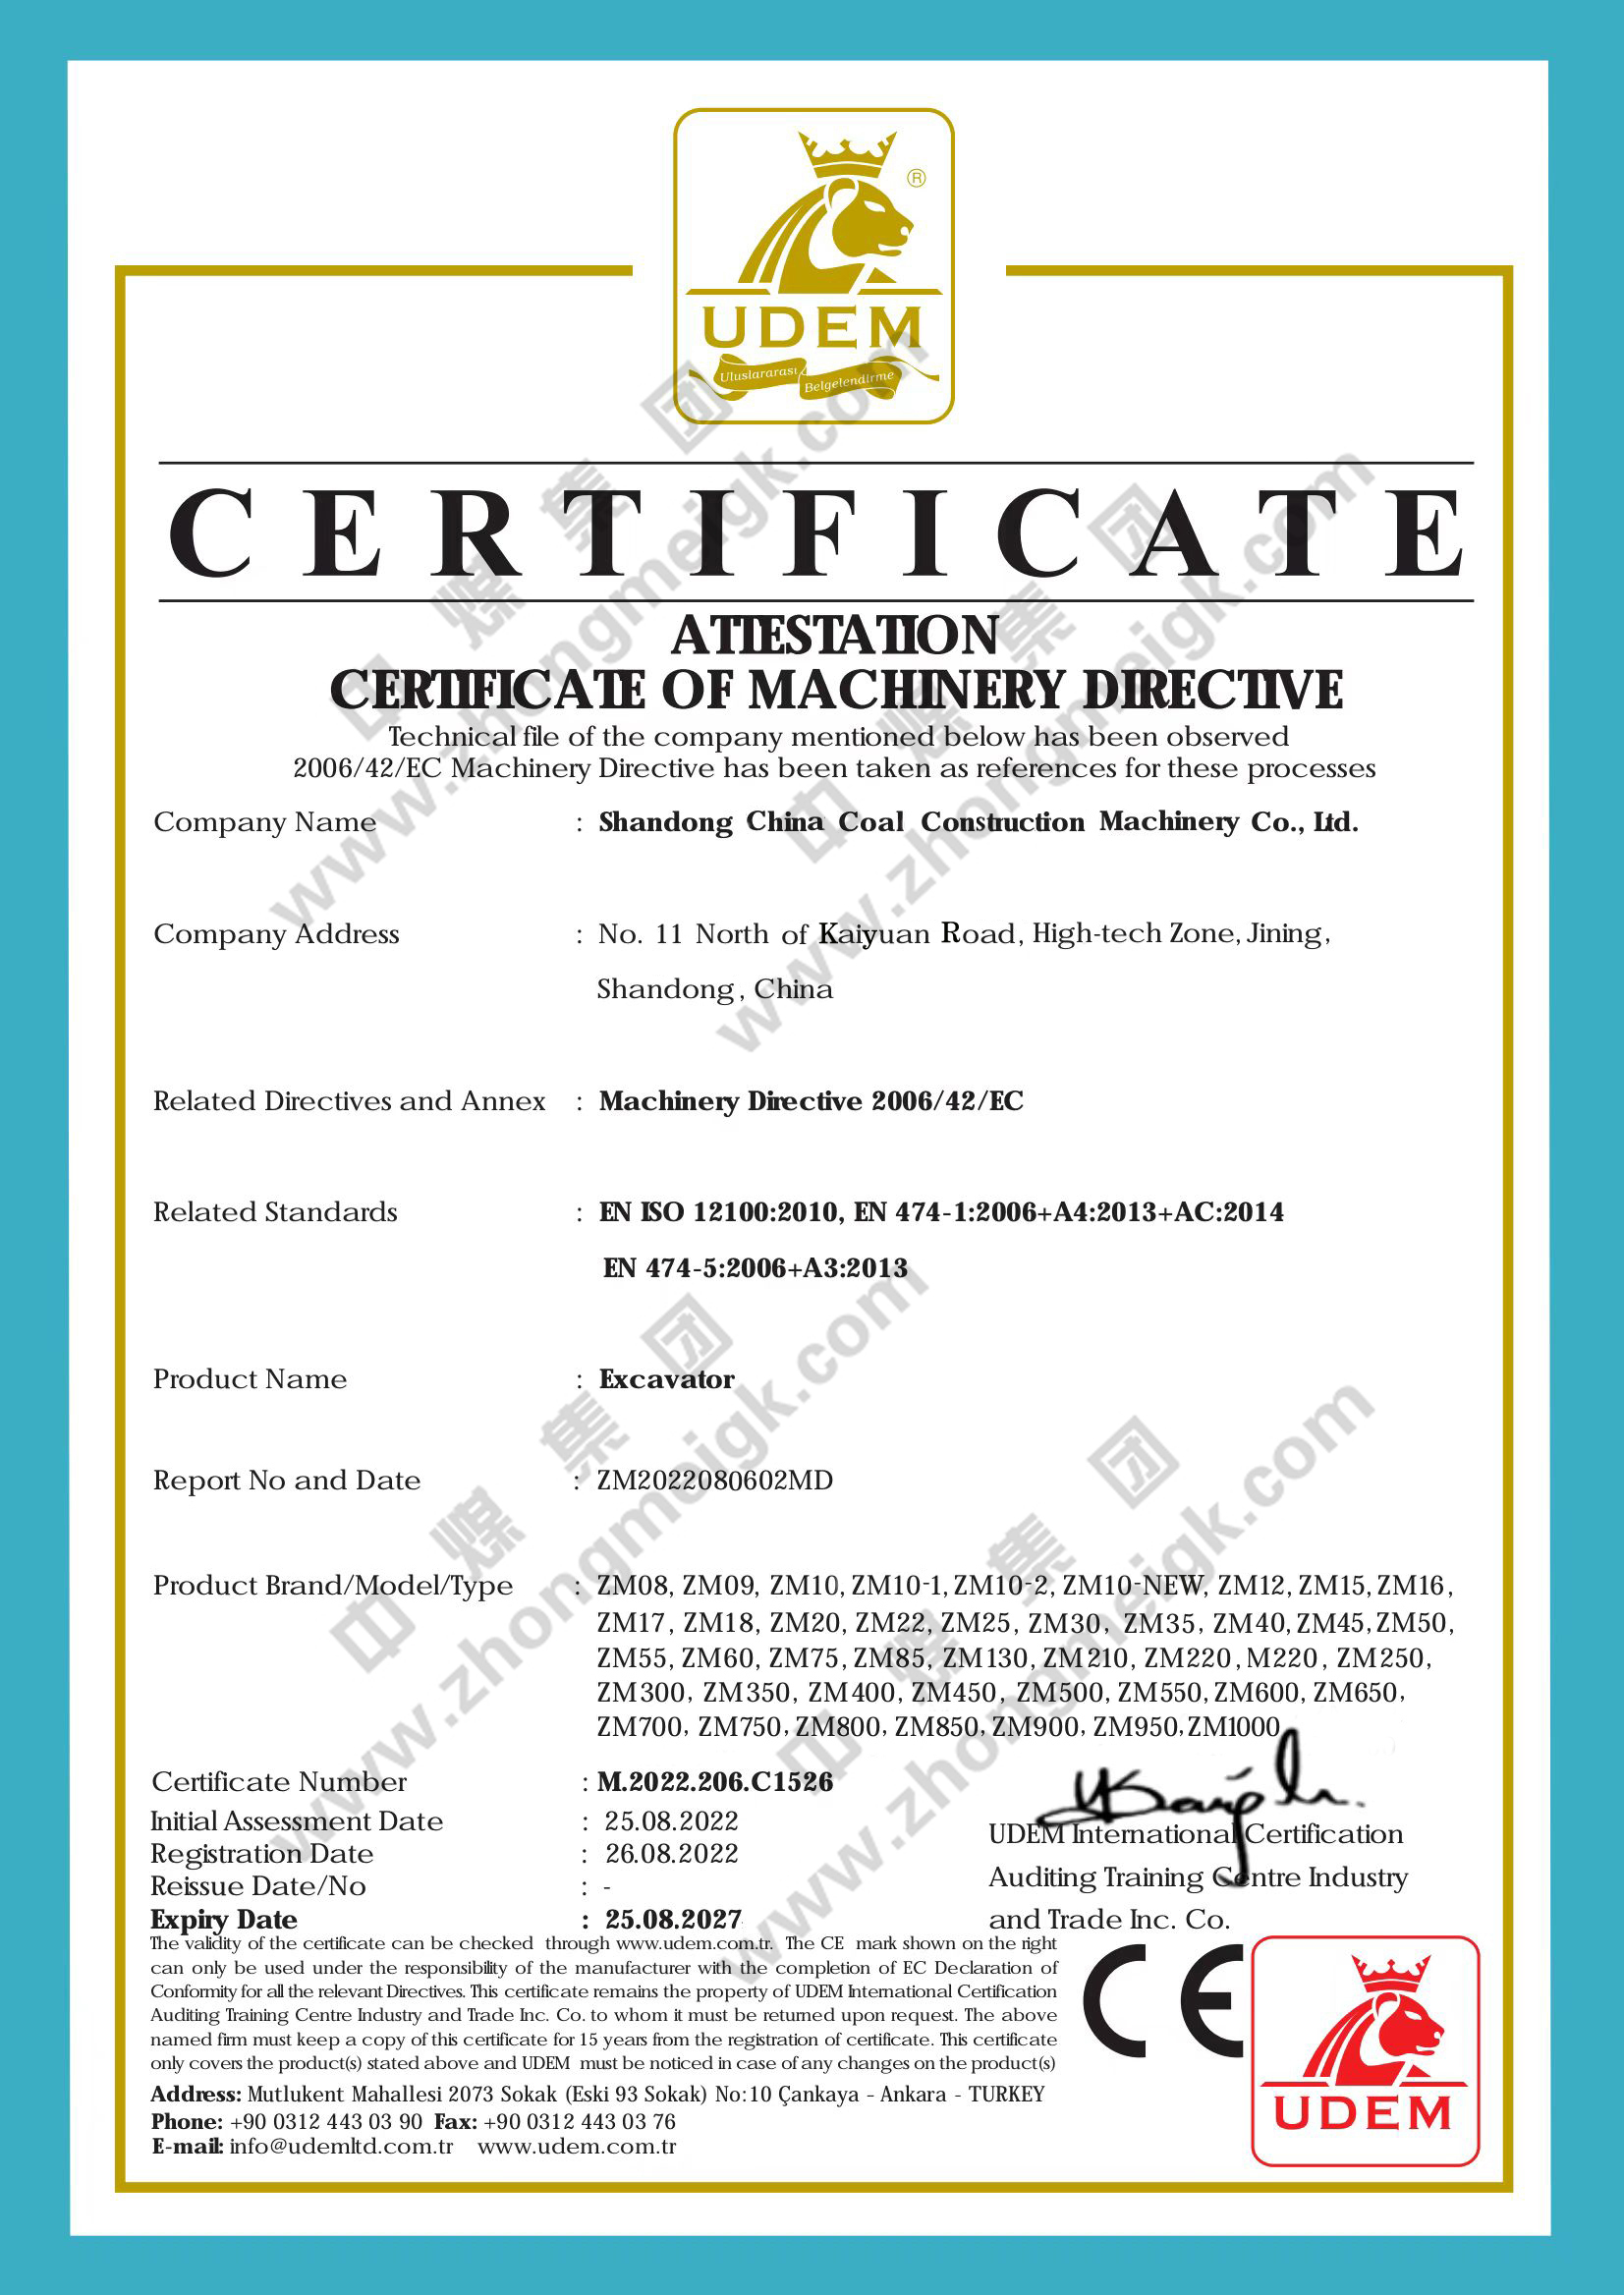 China Coal Group Various Excavators Have Passed The Eu Ce Certification